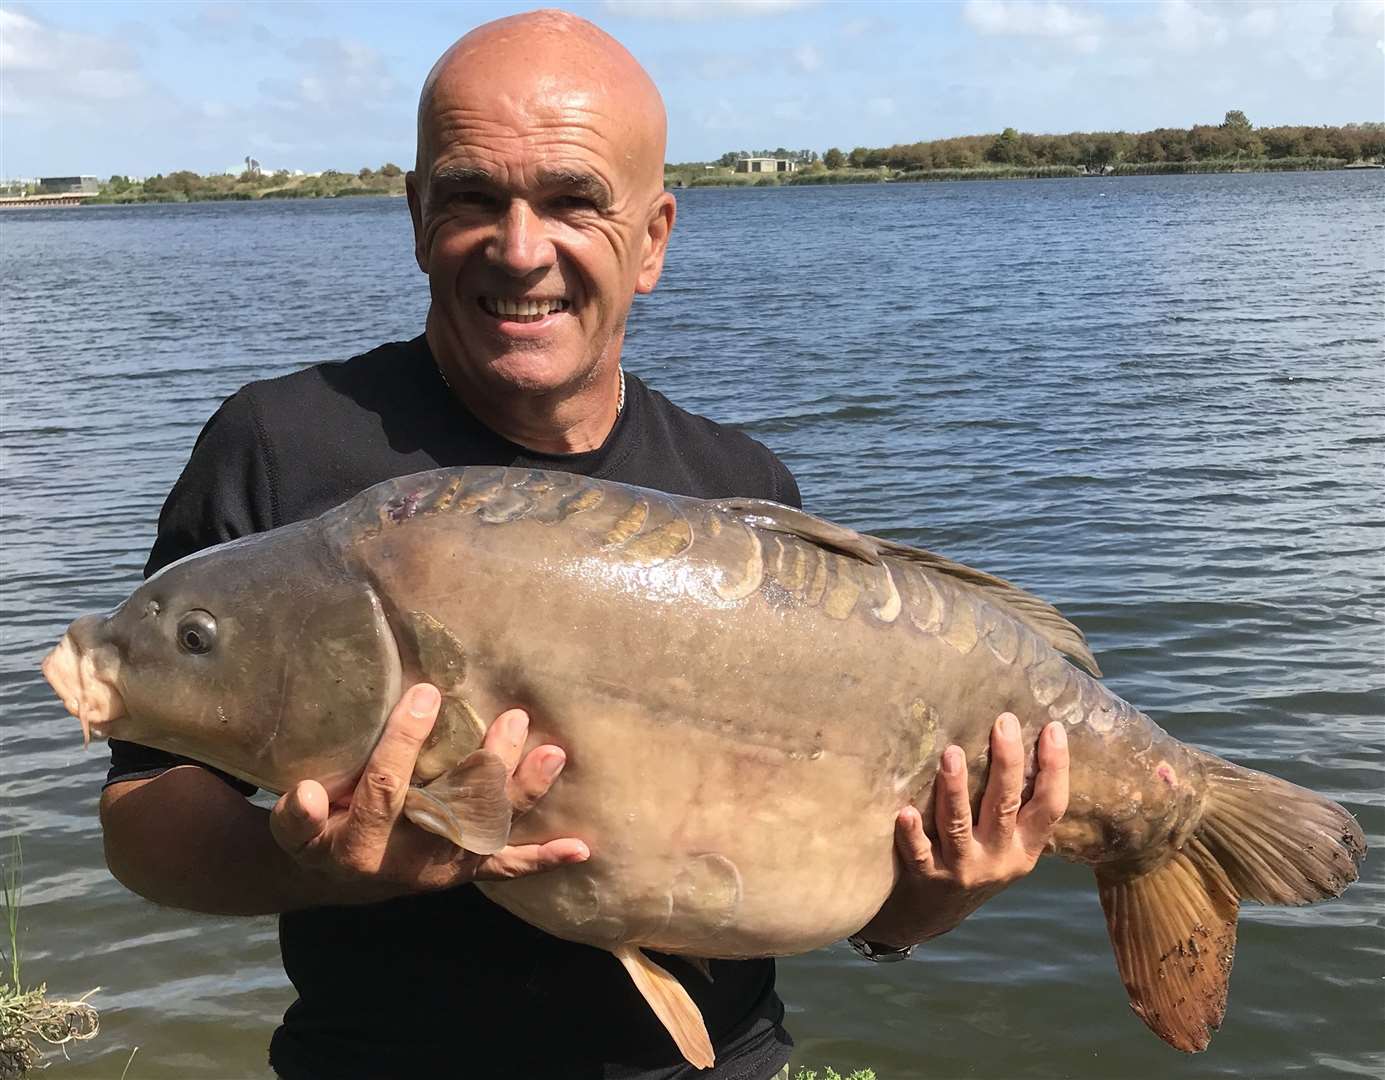 Tony Munt was the latest angler to catch this specimen mirror carp which tipped his scales to 35lb 6oz